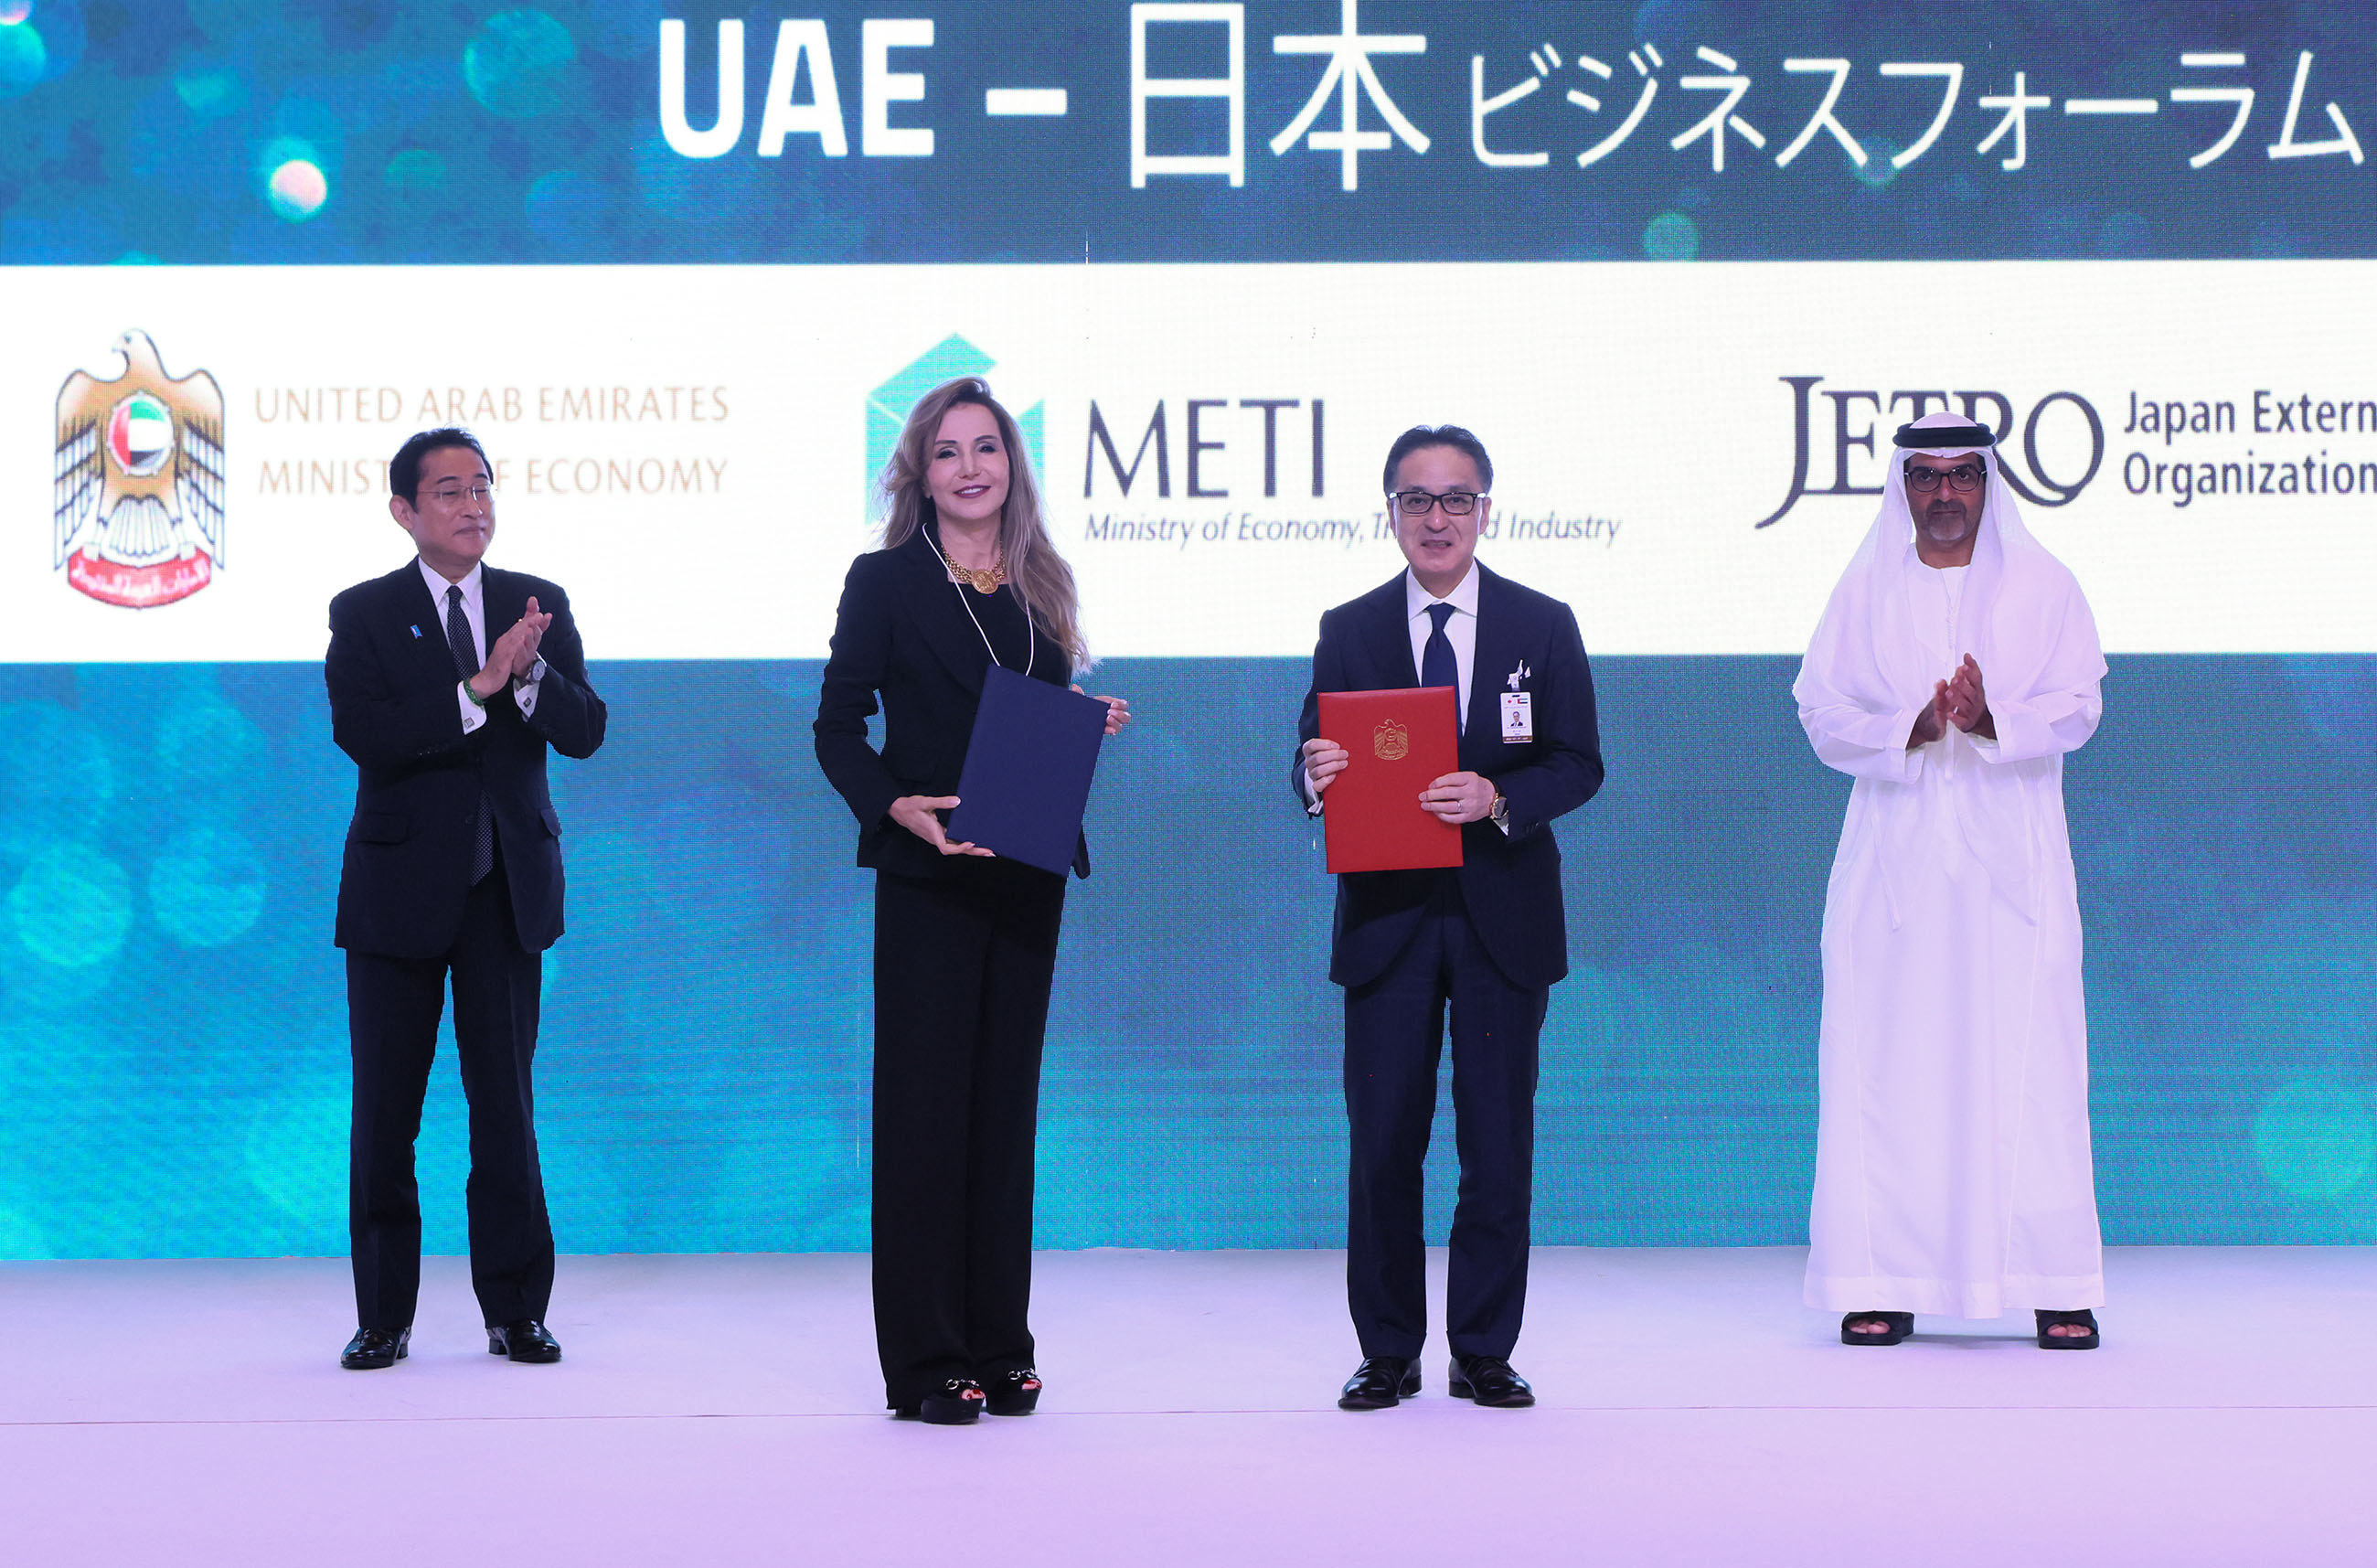 Ceremony to exchange documents at the Japan-UAE Business Forum (21)